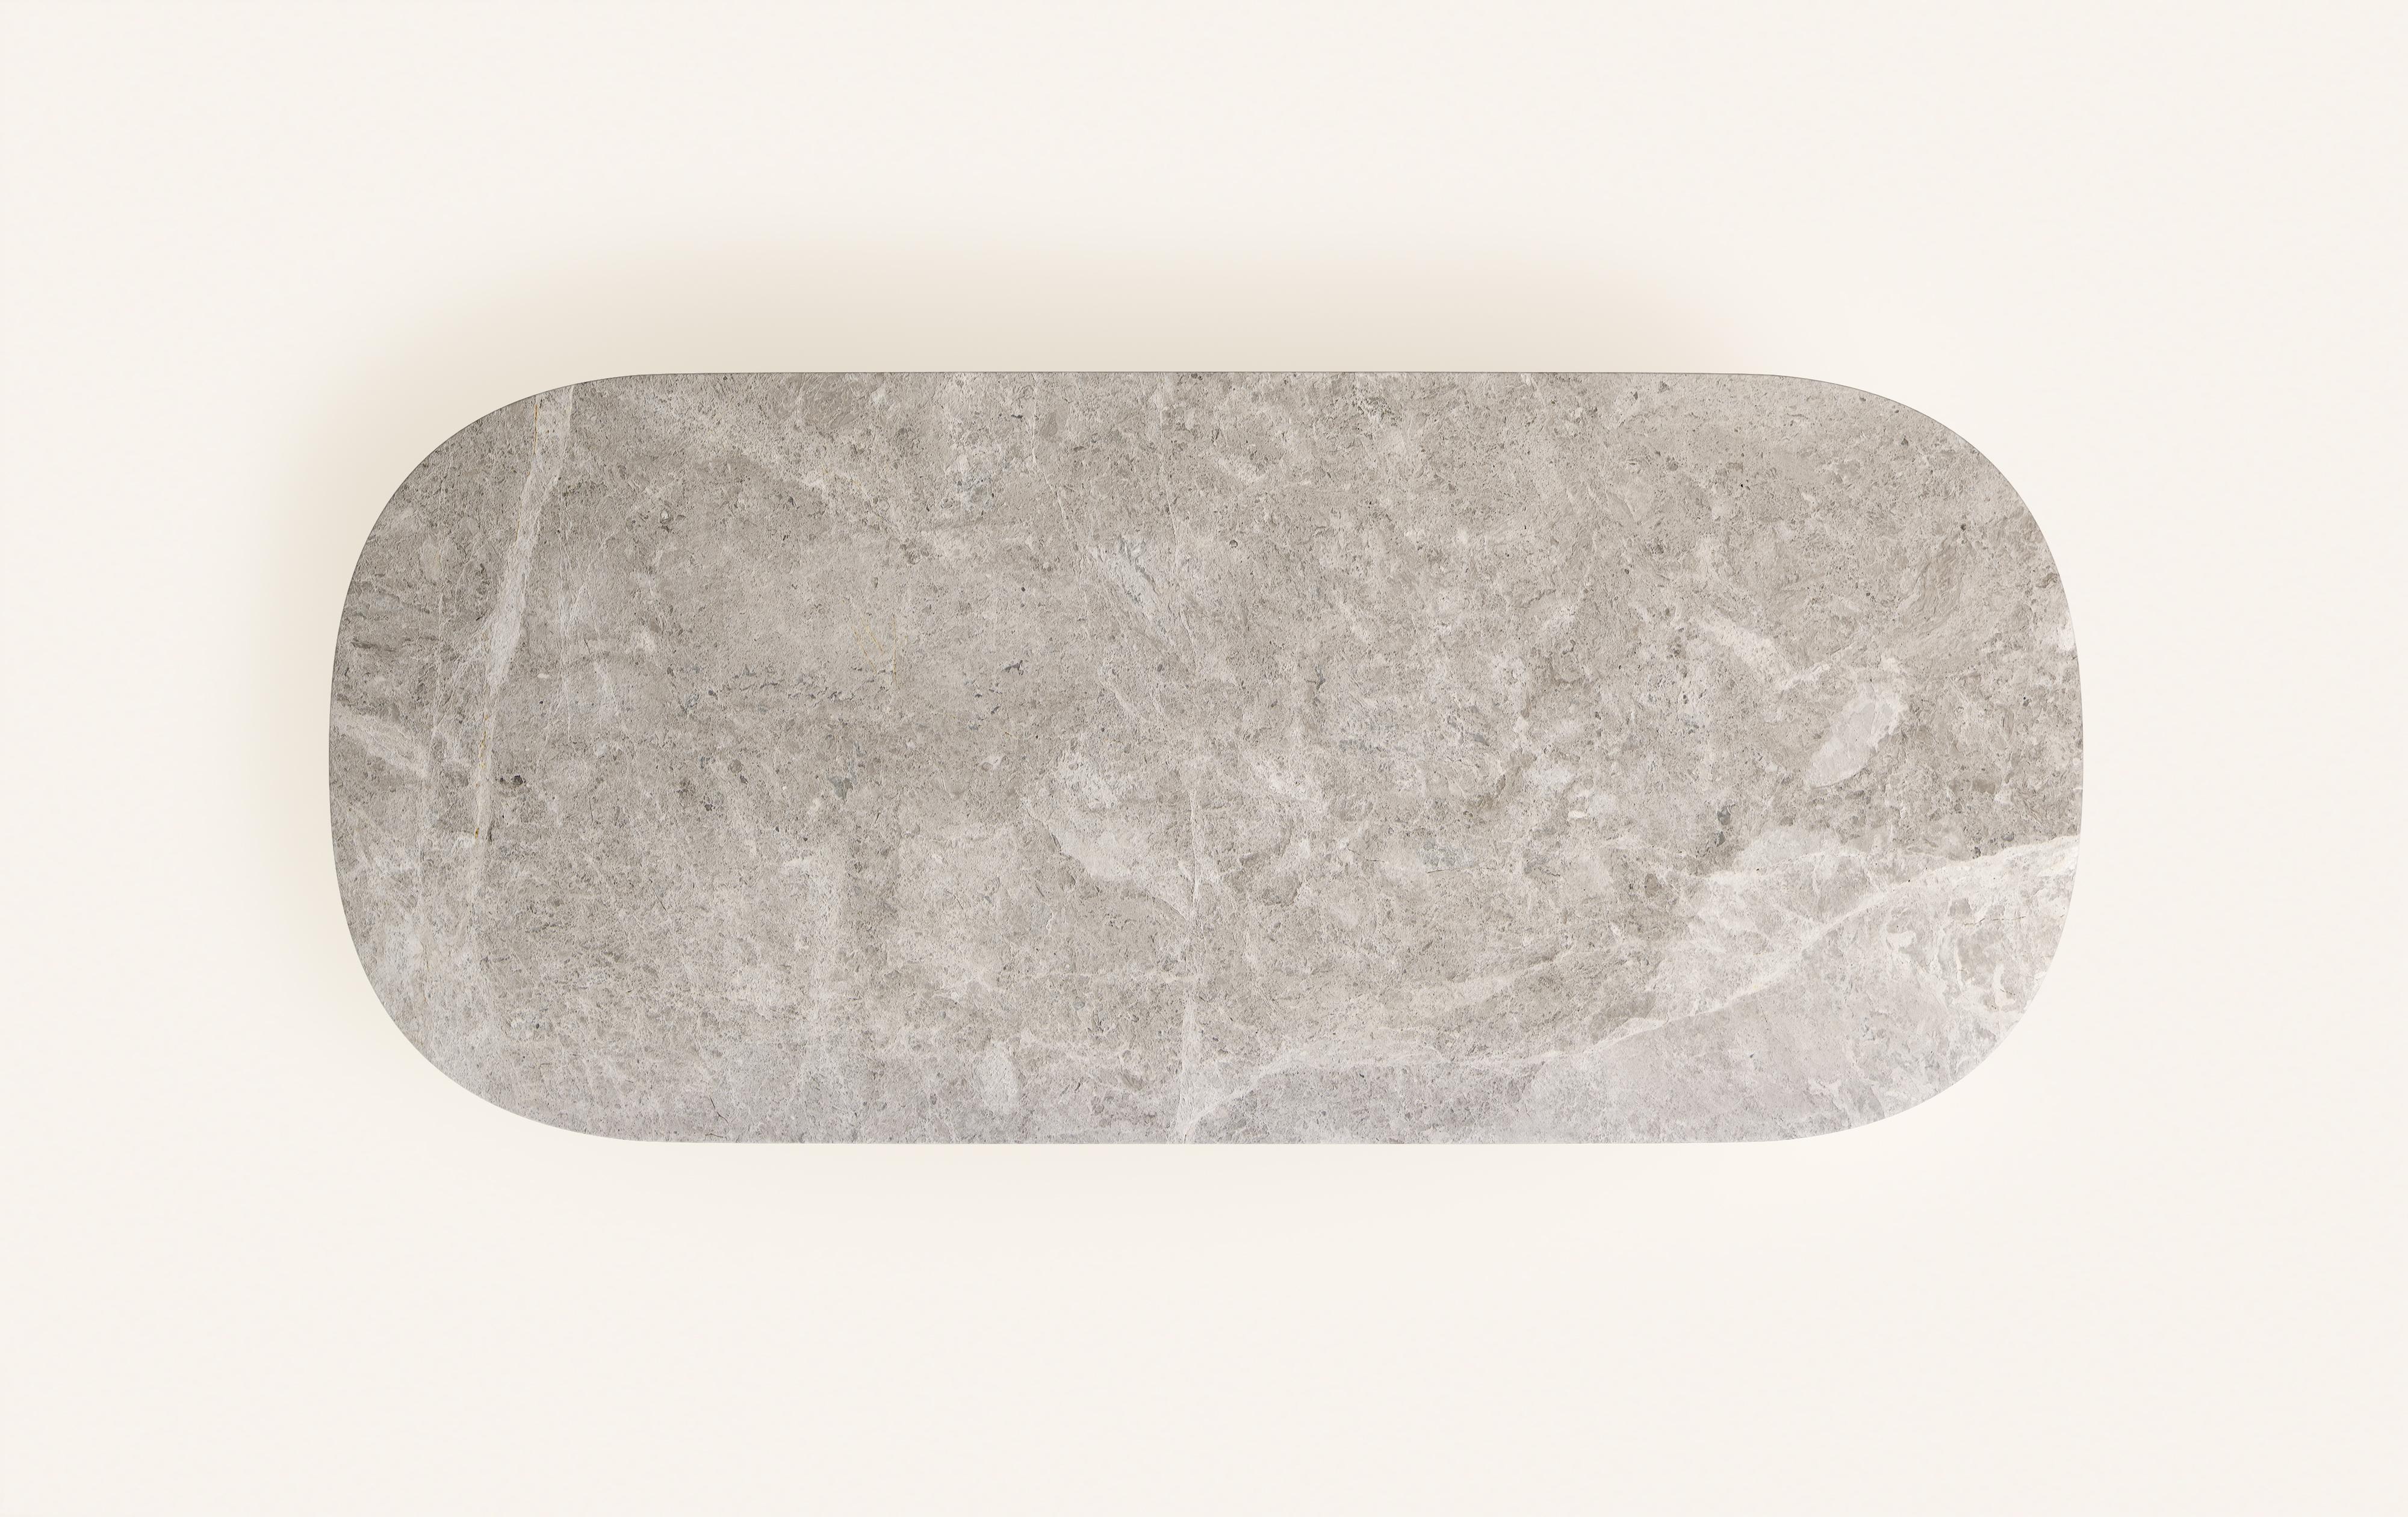 FORM(LA) Cono Oval Dining Table 96”L x 42”W x 30”H Tundra Gray Marble In New Condition For Sale In Los Angeles, CA